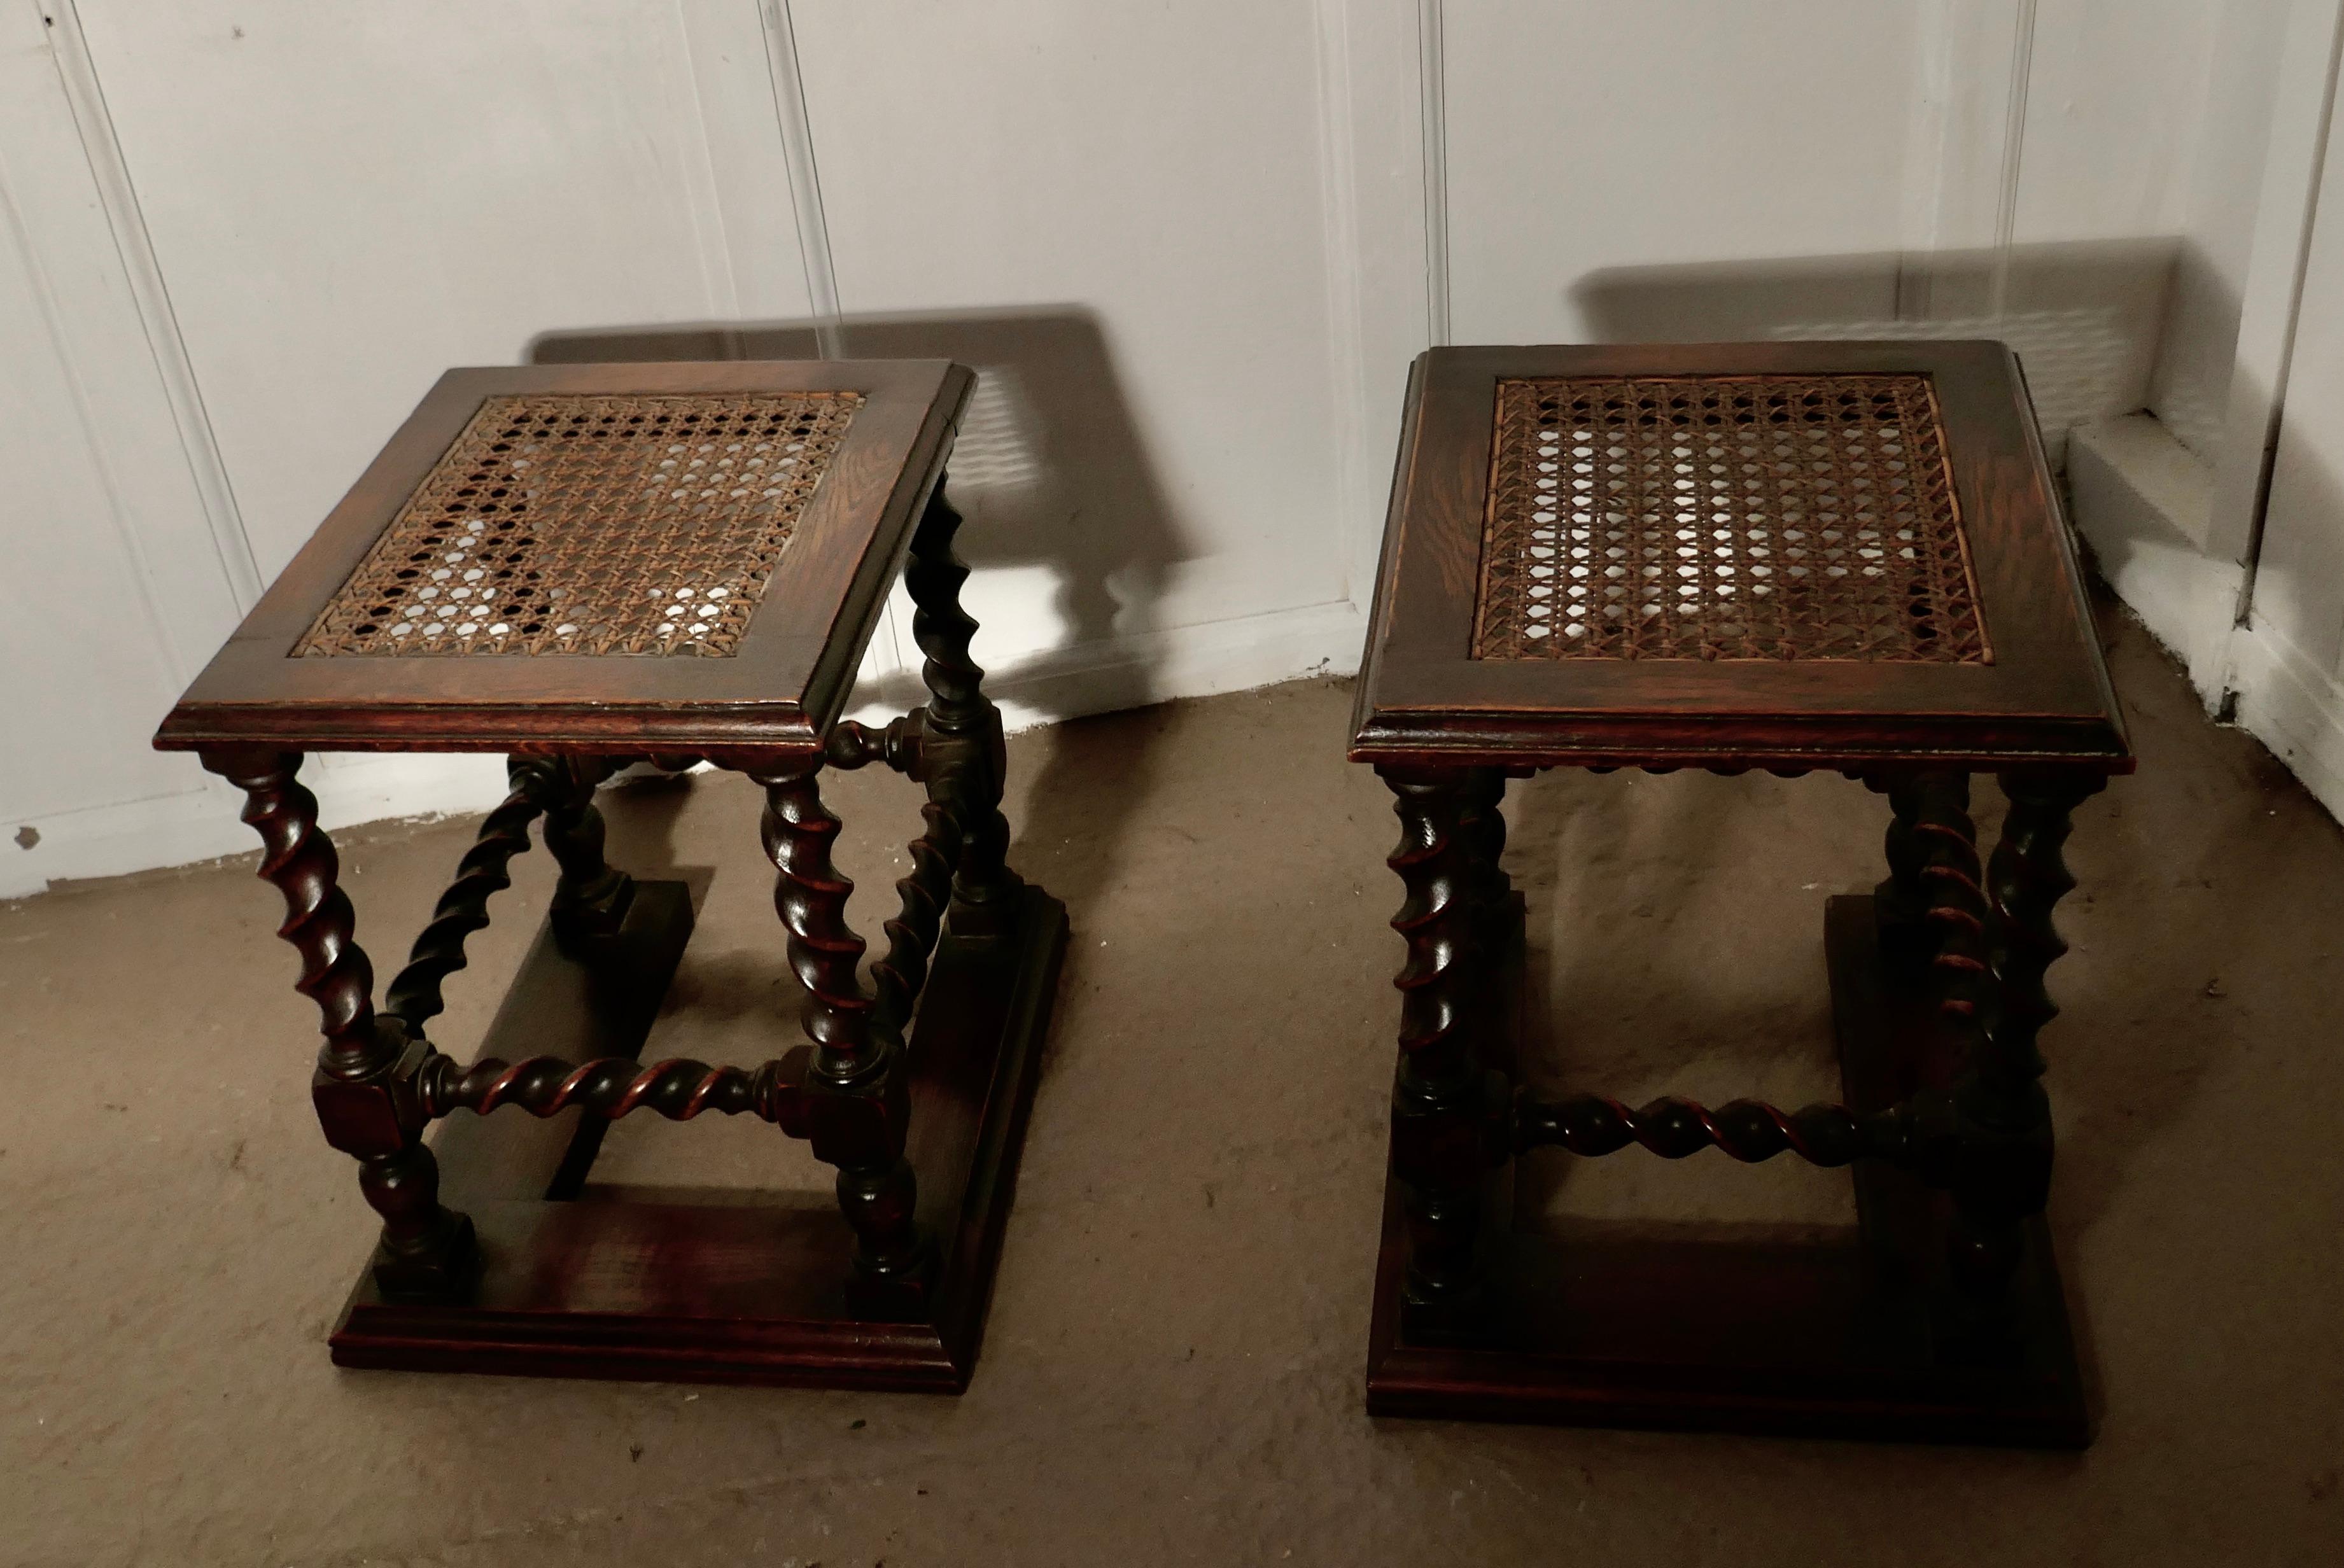 A pair of oak barley-twist and bergère fireside stools

A very attractive pair of stools, they have oak barley-twist turned legs and stretchers
They sit on a broad oak plinth making them very steady and have a bergère woven panel seat
The stools